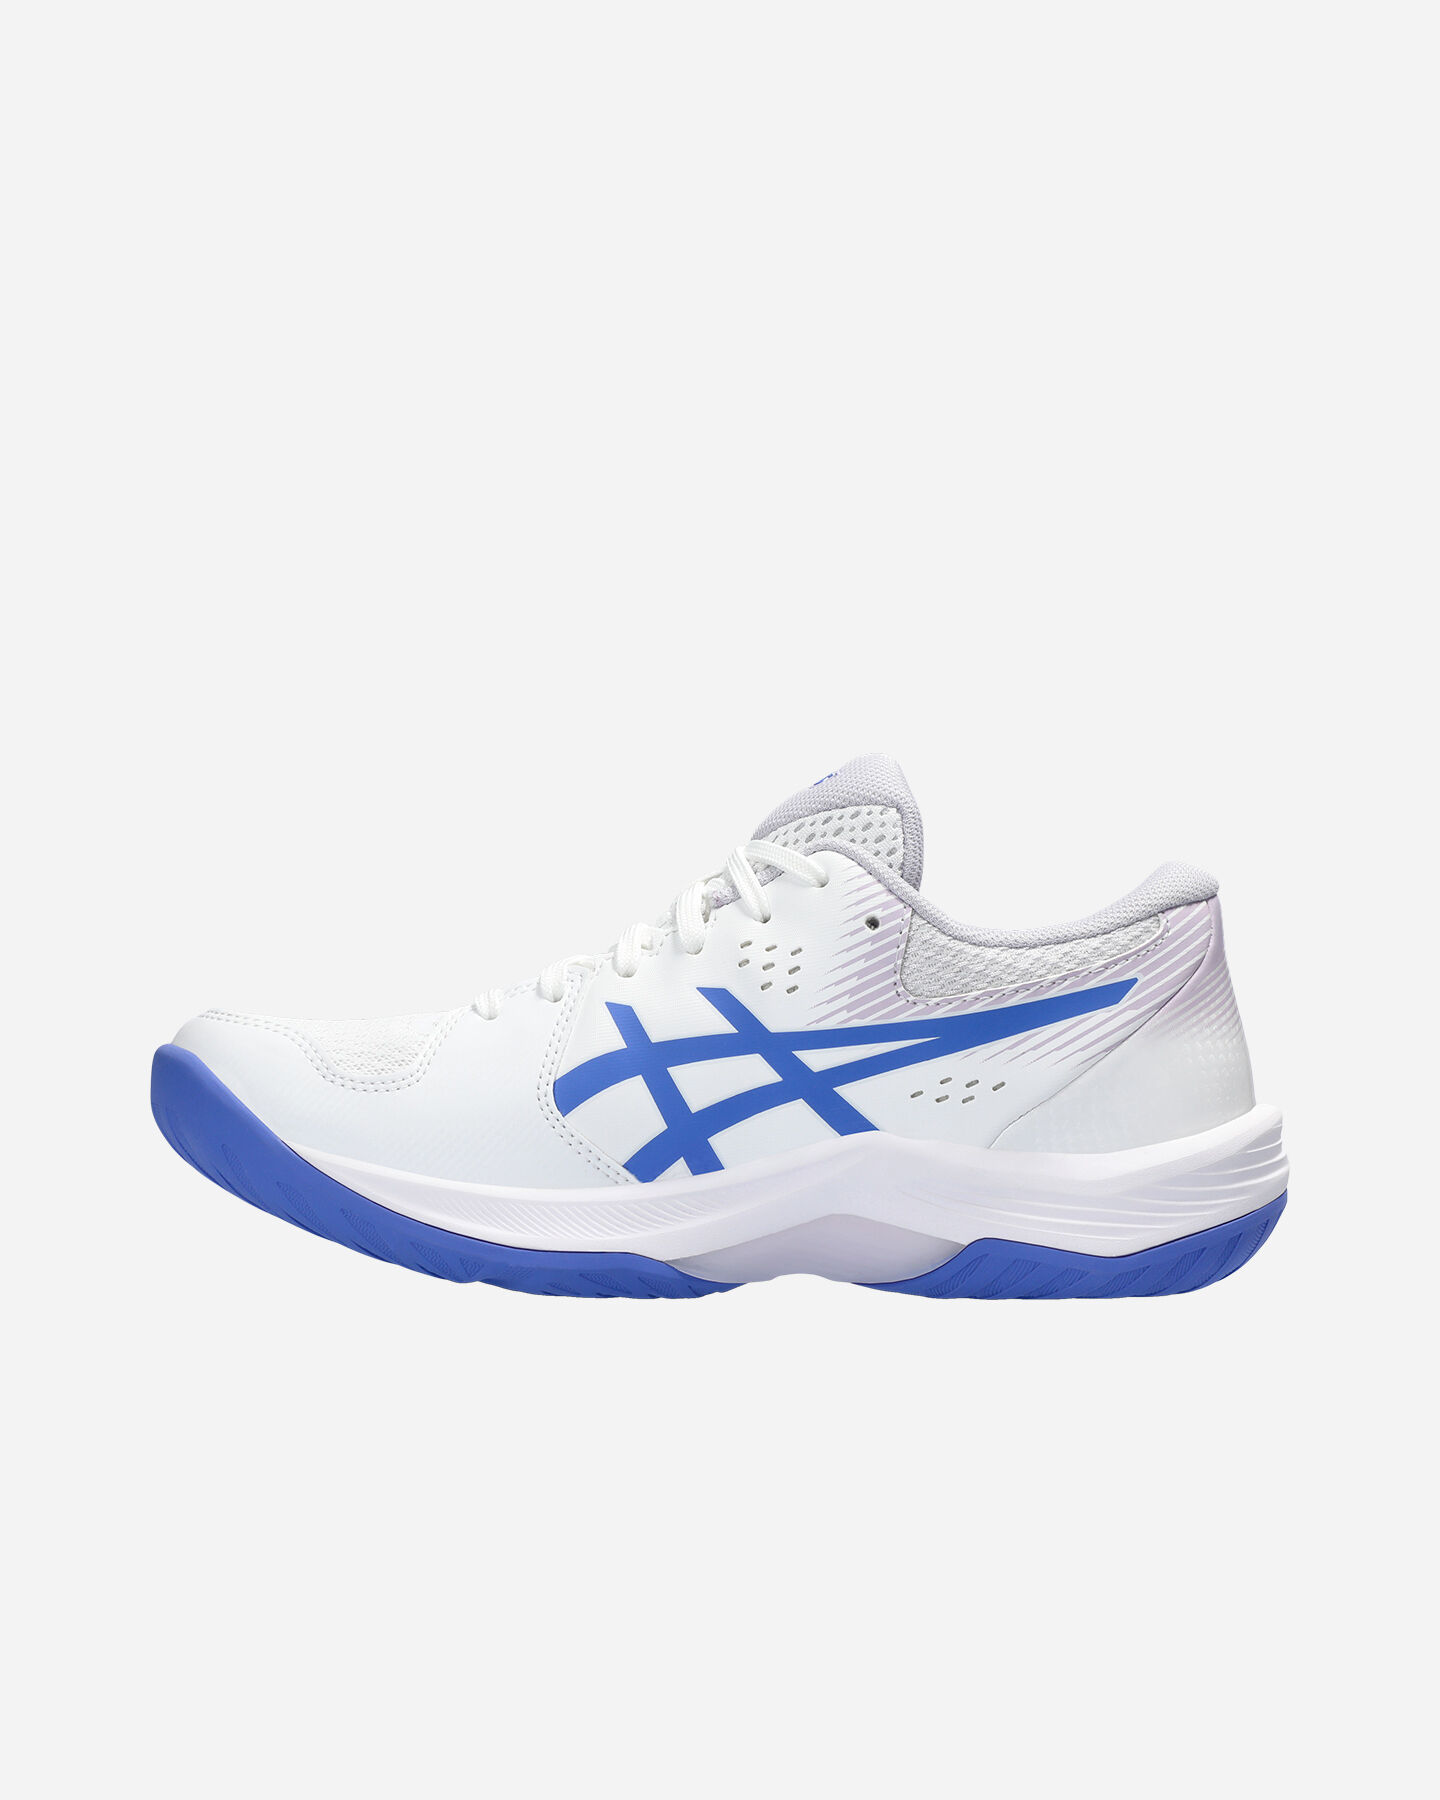  Scarpe volley ASICS BEYOND FF W S5643089|102|6 scatto 5